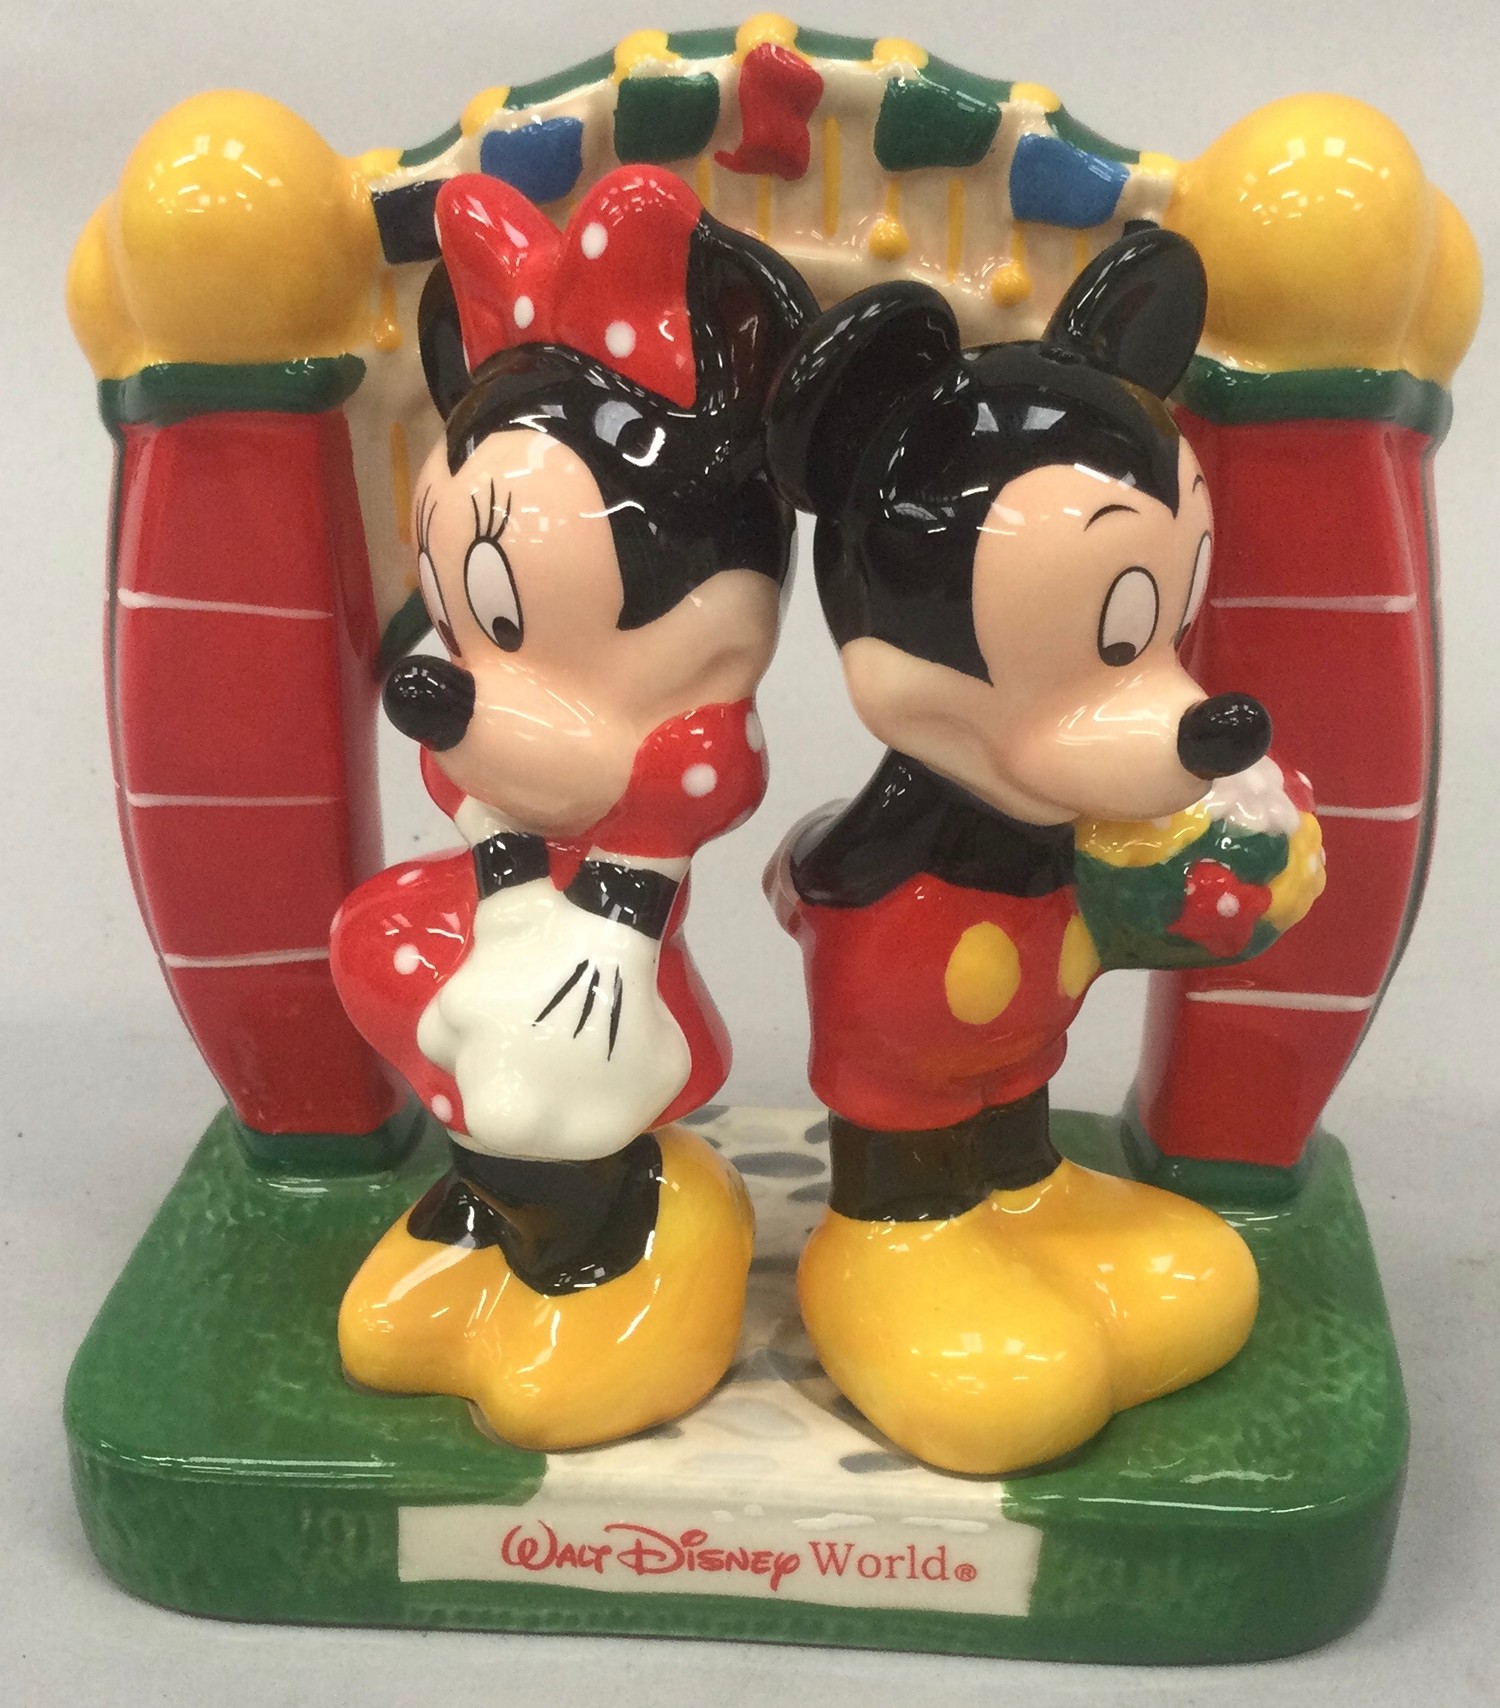 Walt Disney World Mickey and Minnie mouse salt and pepper condiment set.